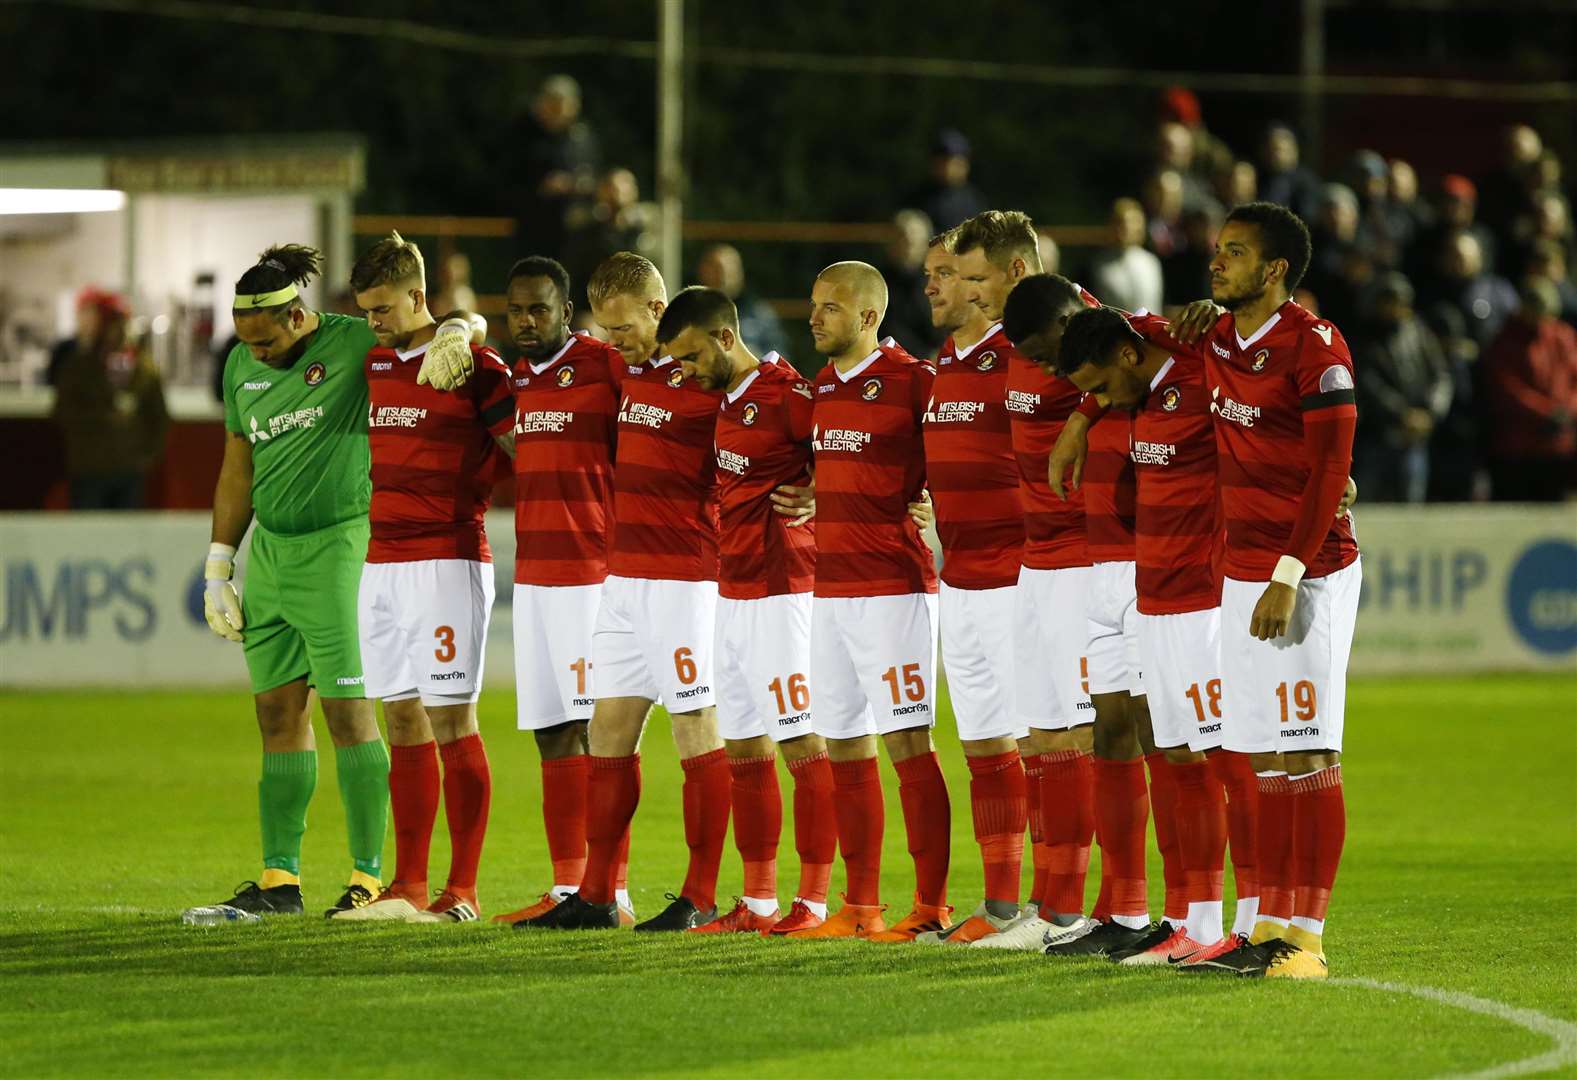 Ebbsfleet United have made players available for transfer Picture: Andy Jones